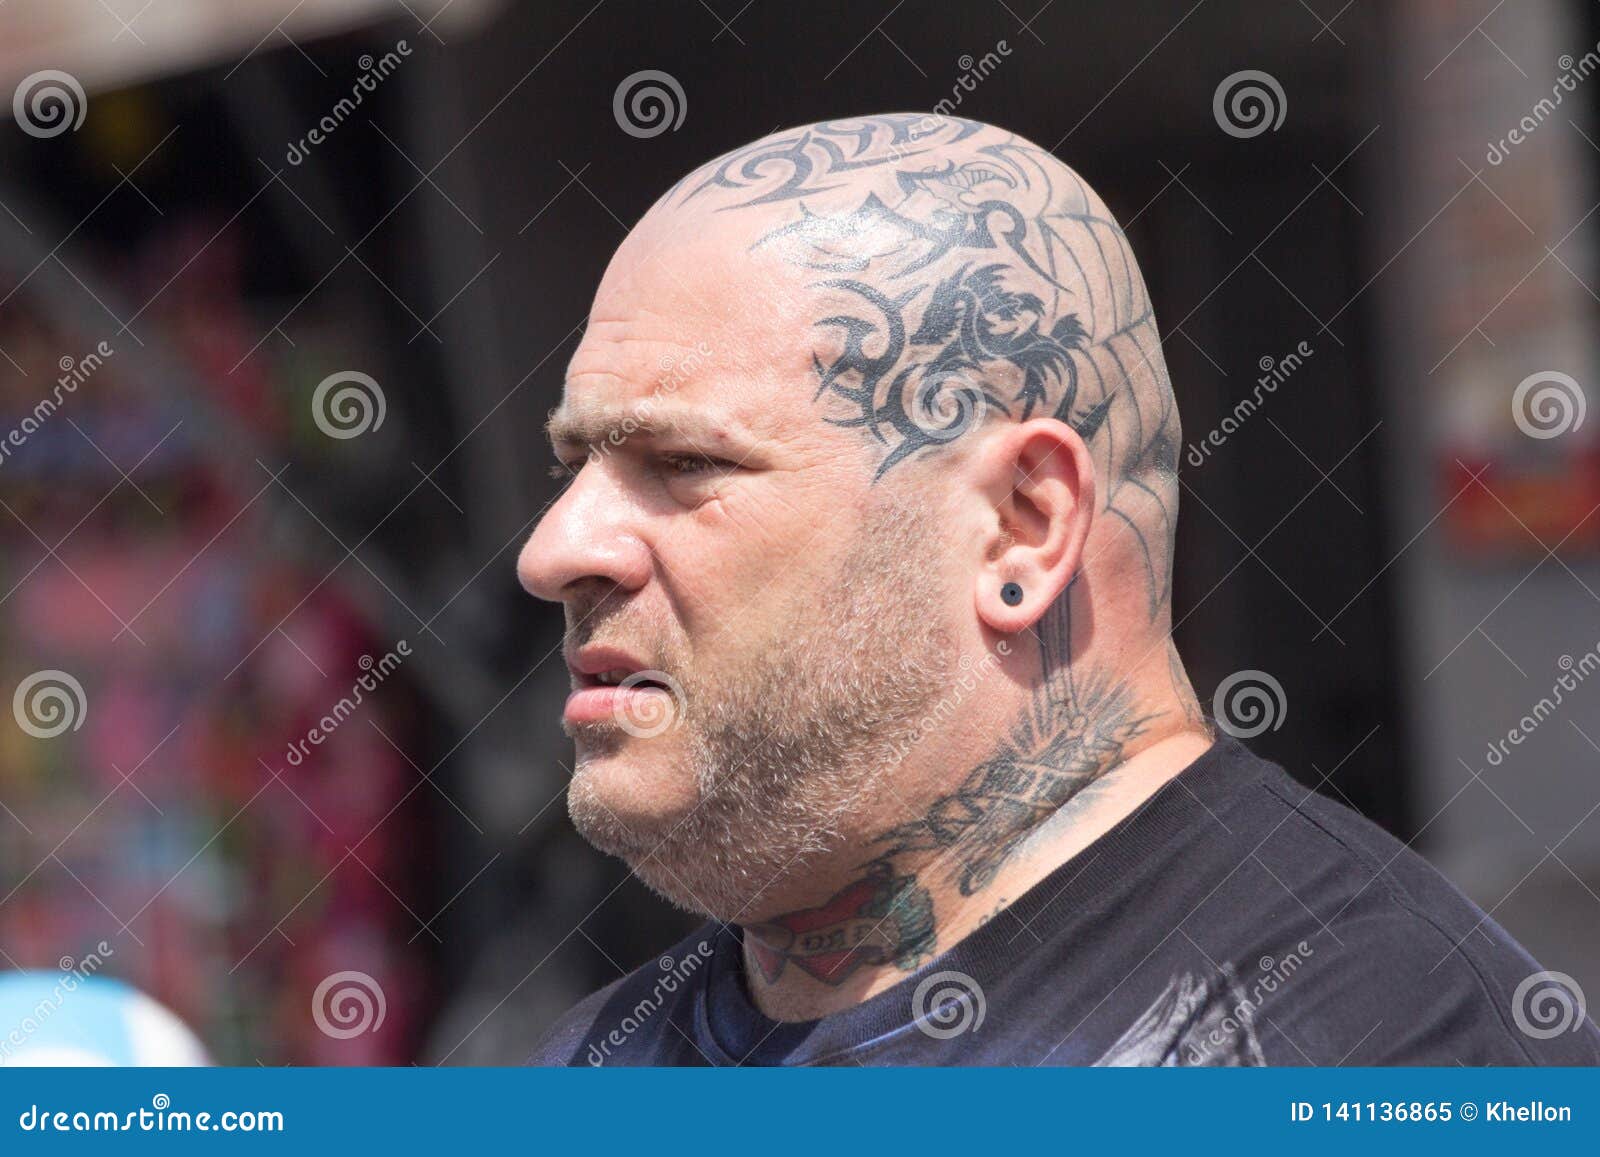 Man with Heavily Tattooed Head Editorial Image - Image of bald, tattoo:  141136865